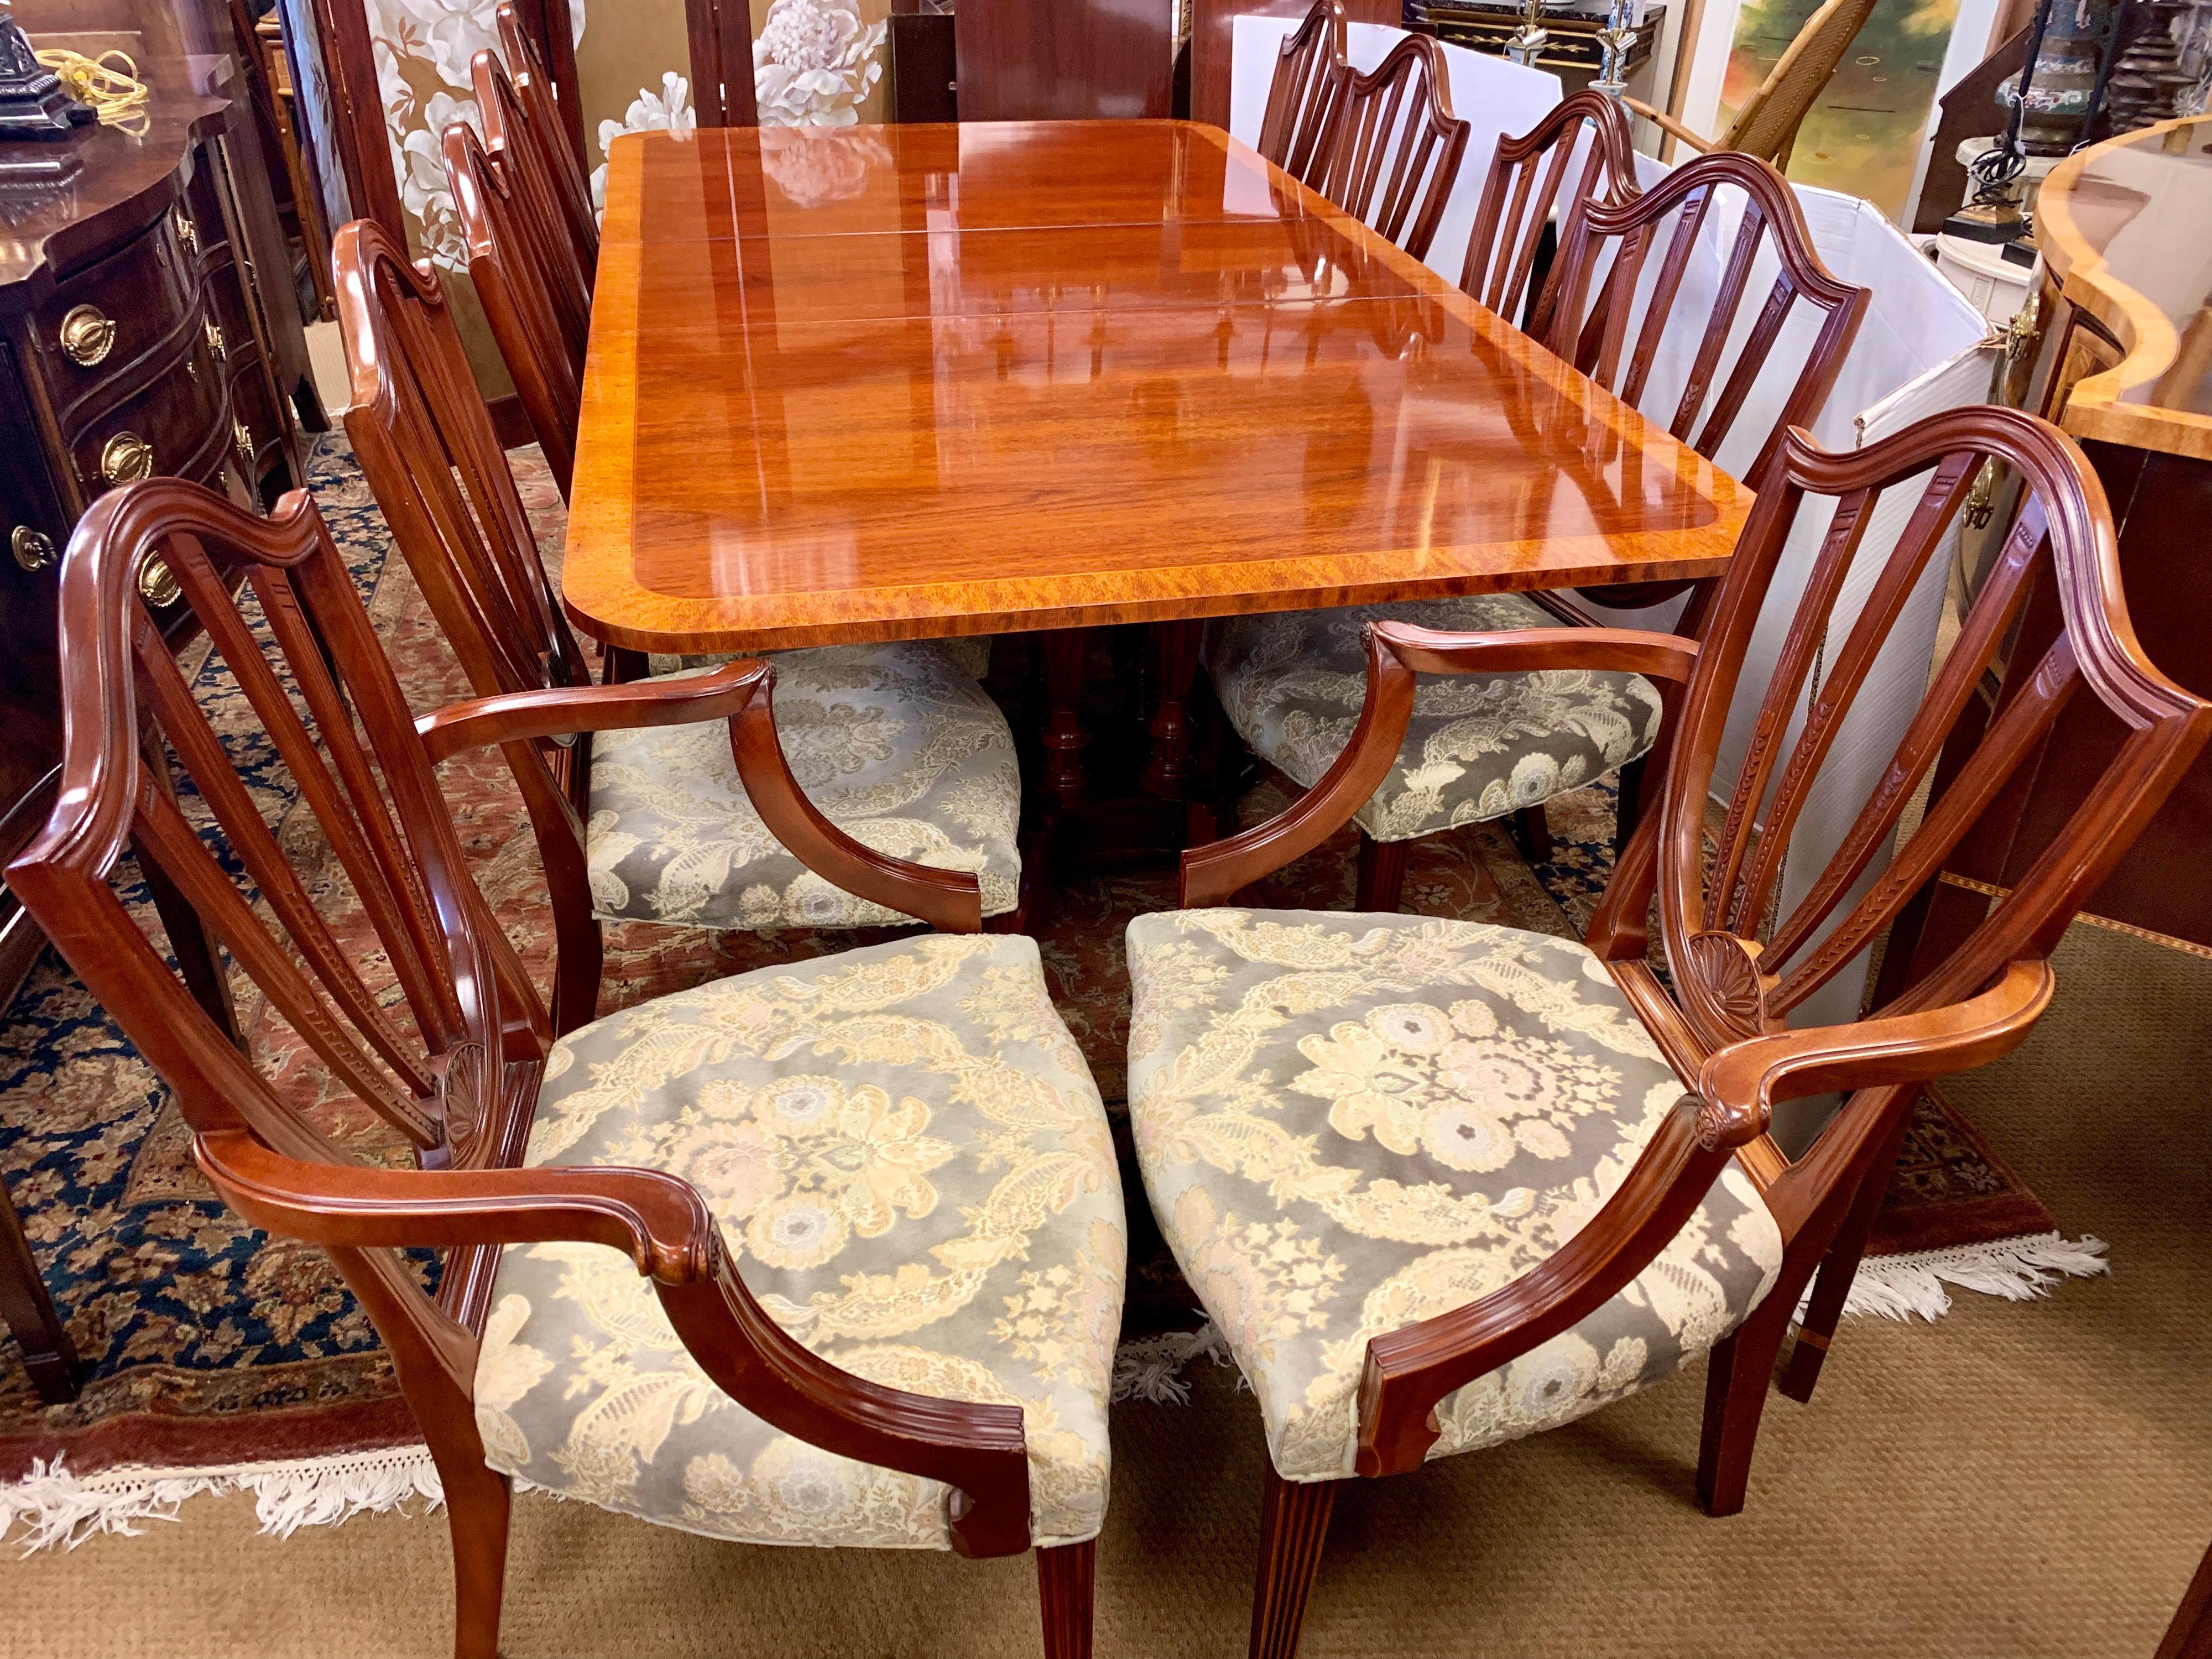 Stunning Baker Furniture dining room set includes a double pedestal mahogany table with three leaves; ten shieldback chairs which include two arms and eight side chairs. Table features a banded inlay all around and brass paw feet. All Baker